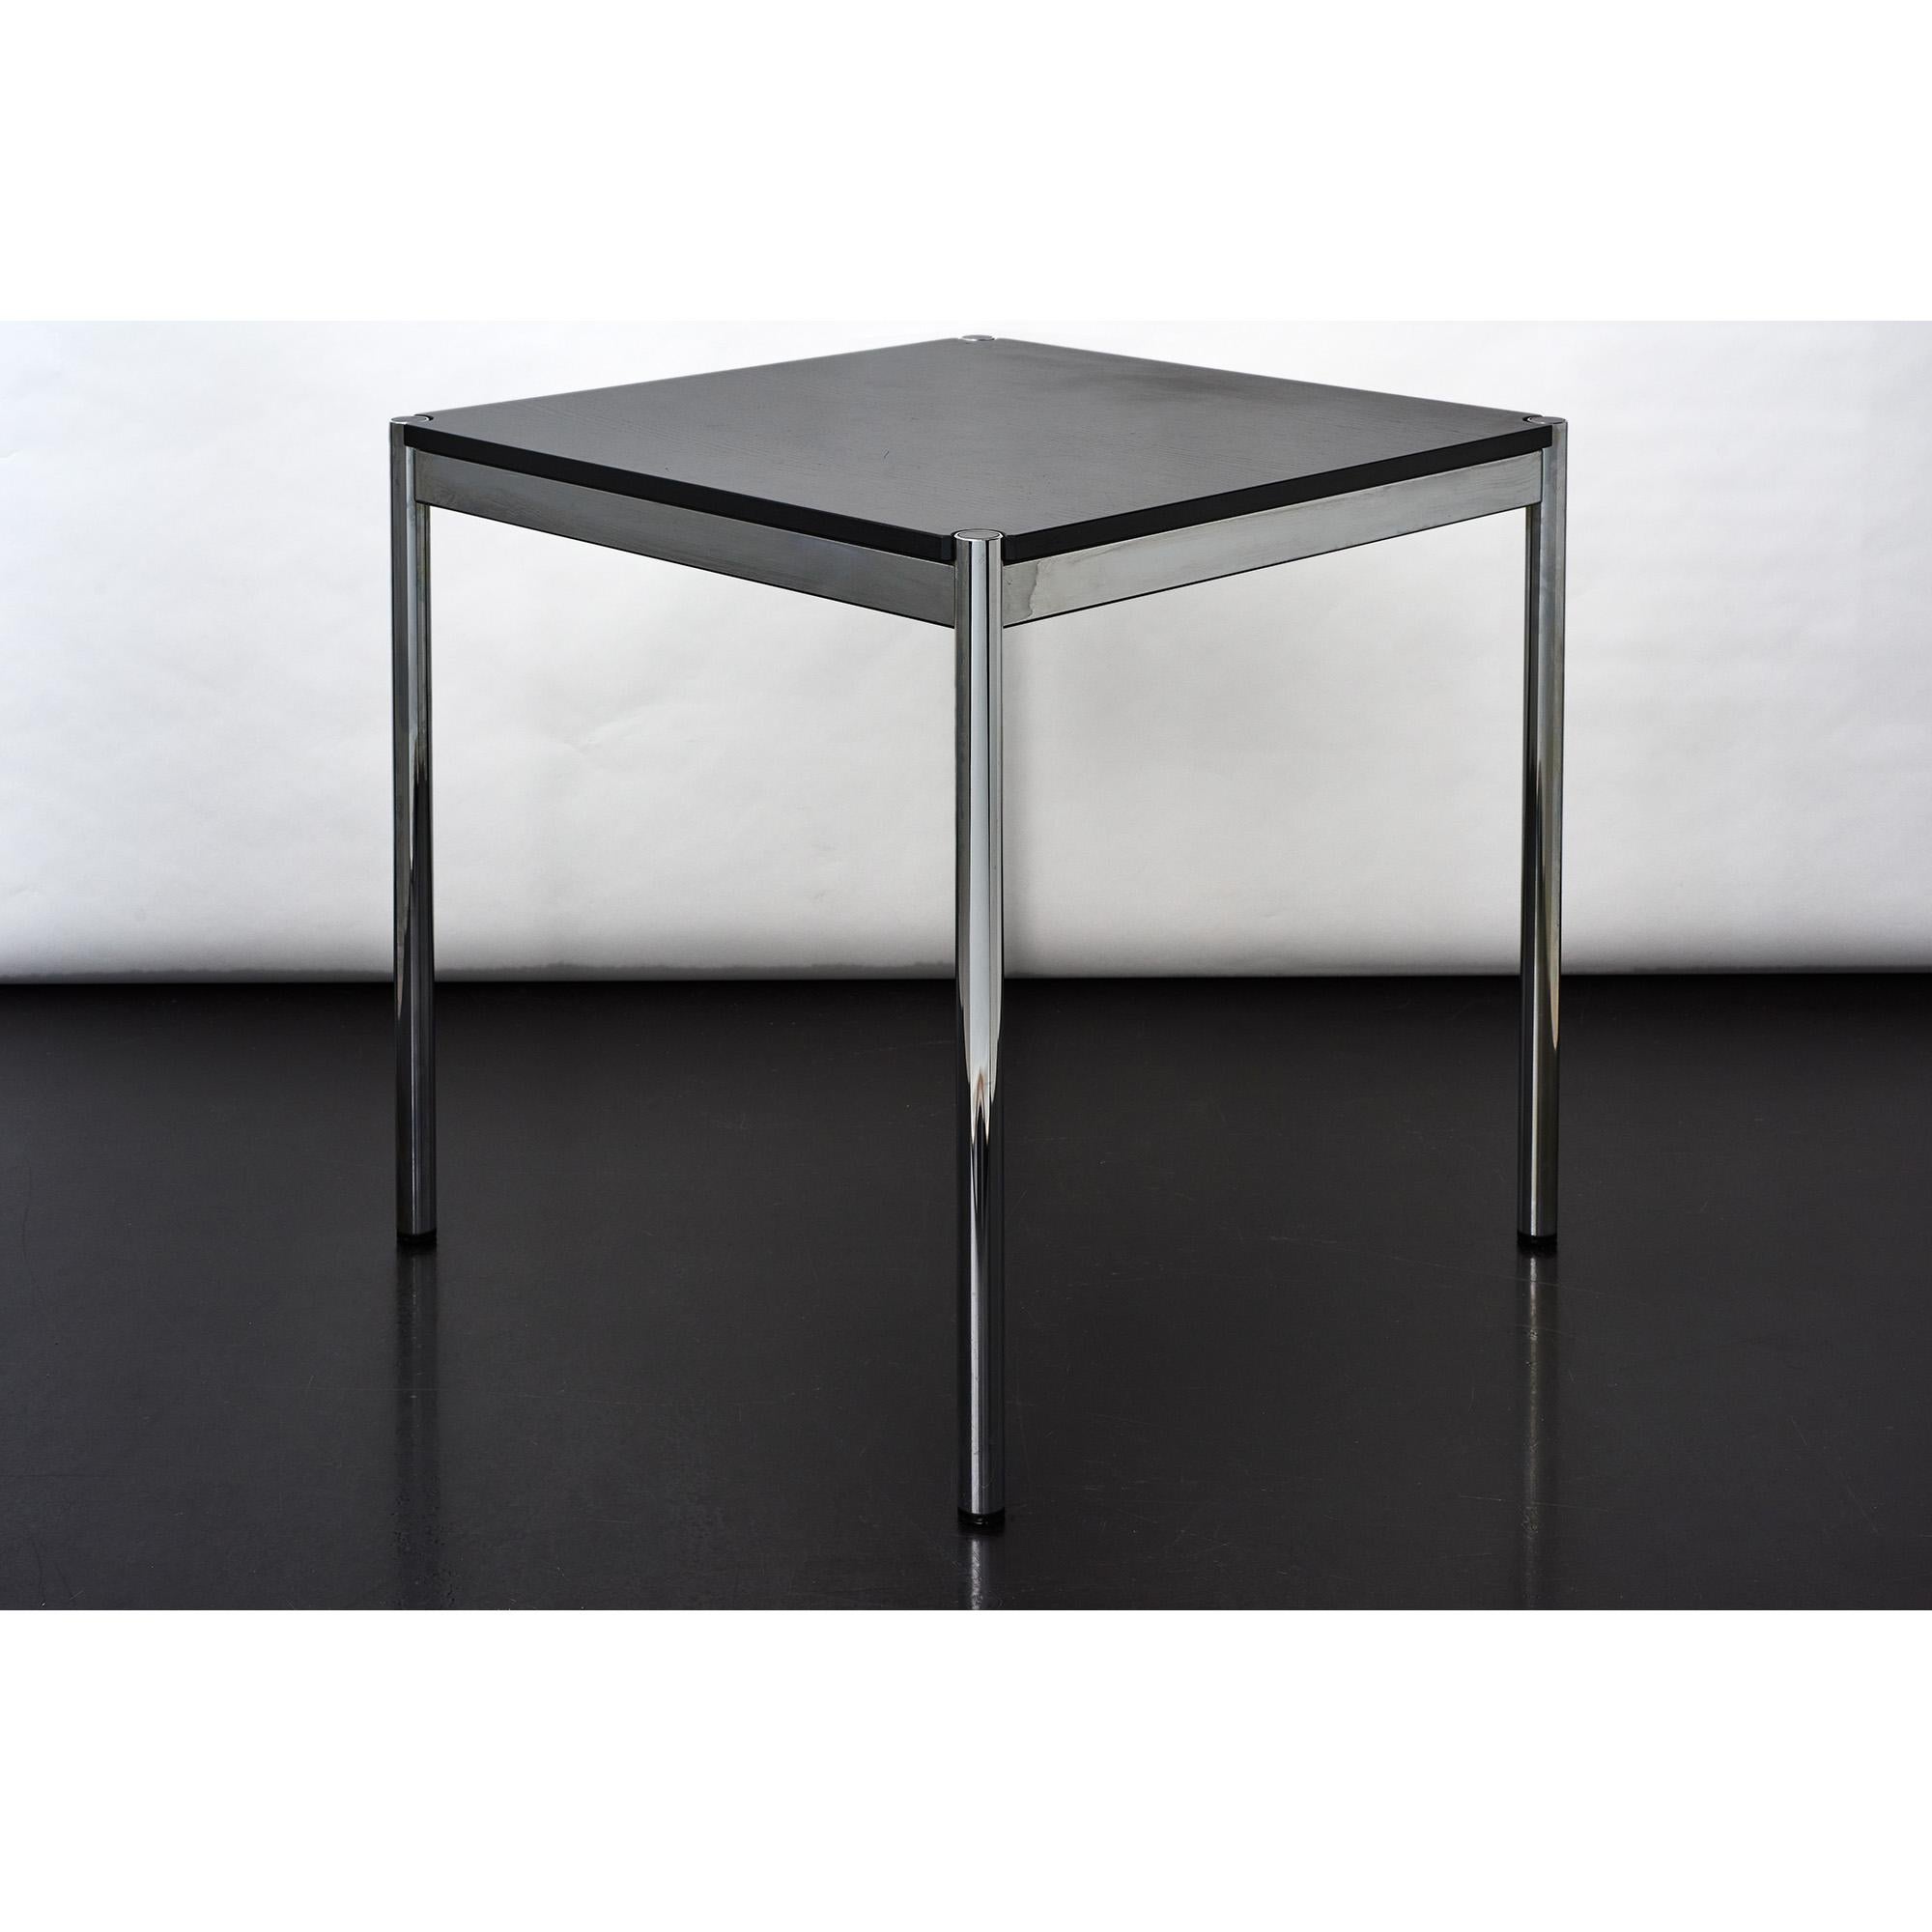 he USM Haller square table by Fritz Haller and Paul Schärer is ideal for residential and business spaces. Whether as a desk solution in your home or office, the USM table impresses with its high degree of qualitiy and minimalism.
Very good condition!